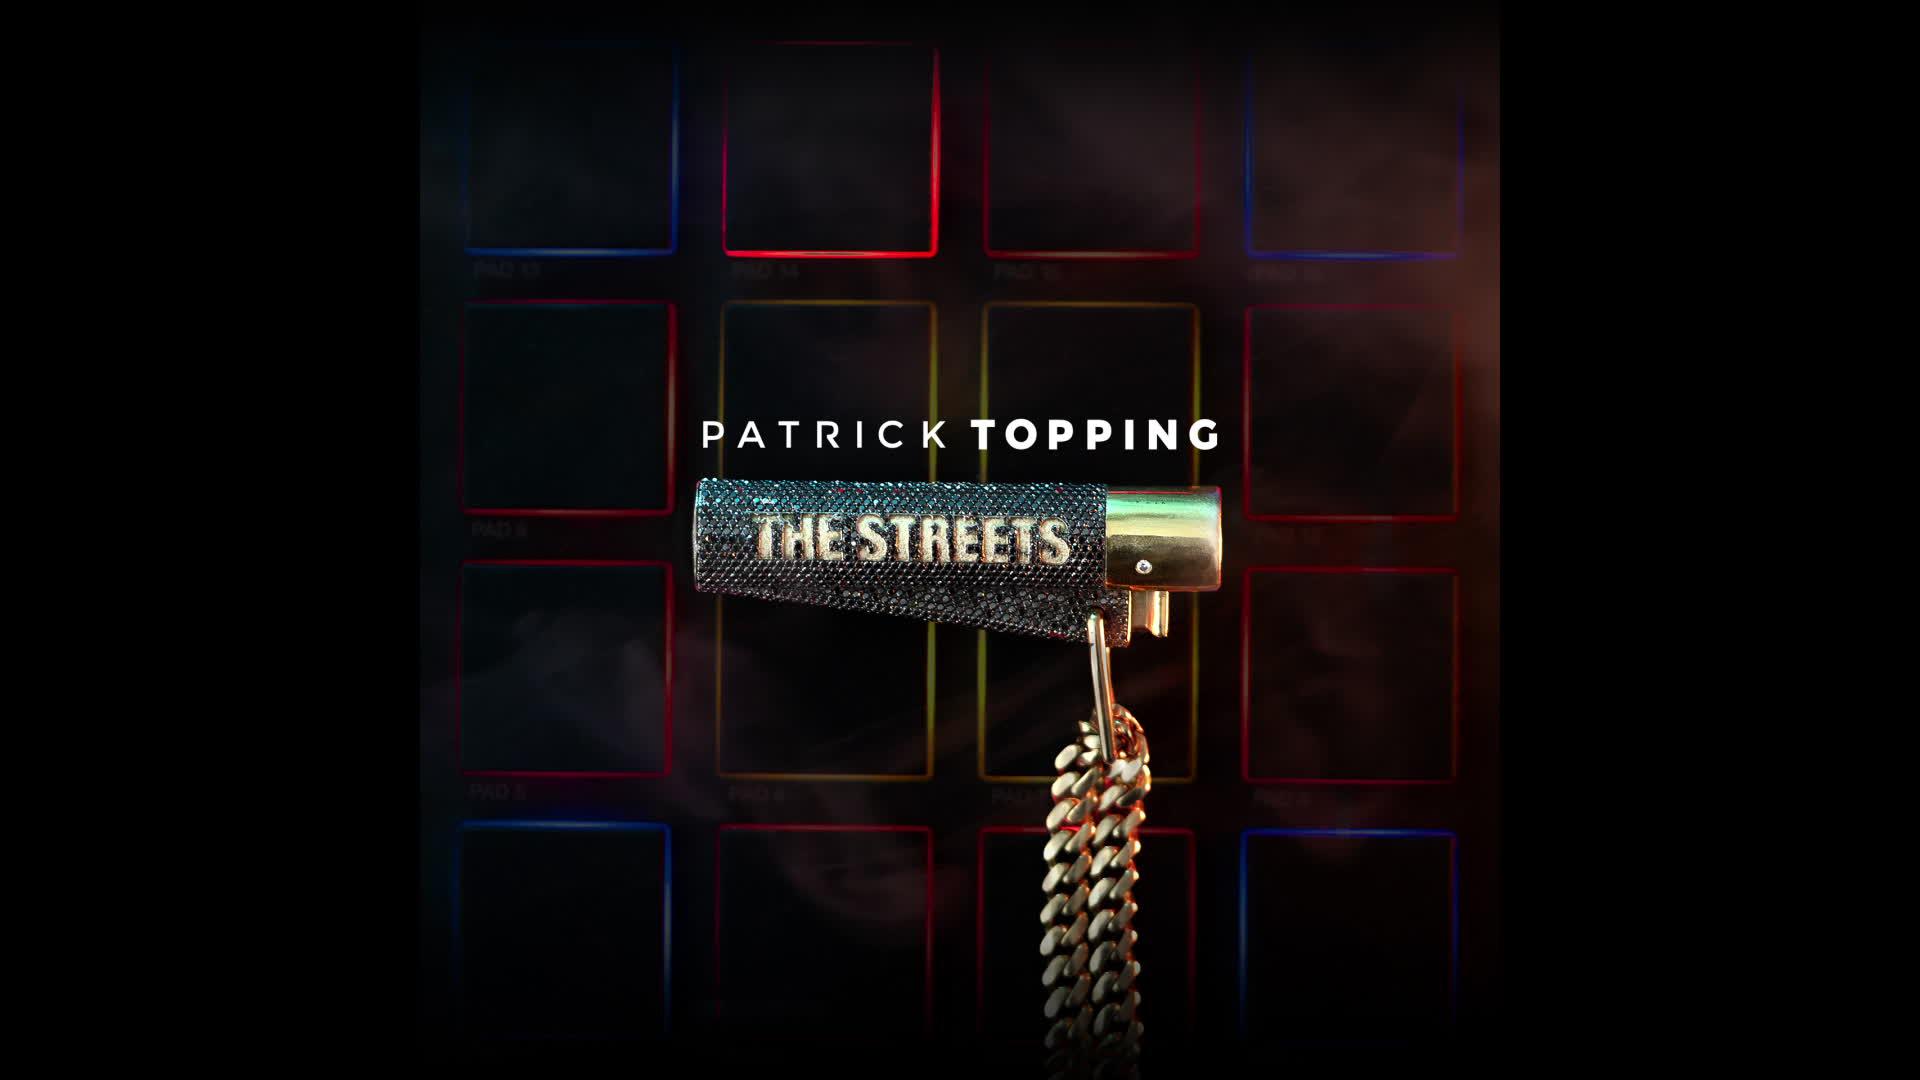 The Streets - Who's Got The Bag (21st June) (Patrick Topping Remix / Visualiser)